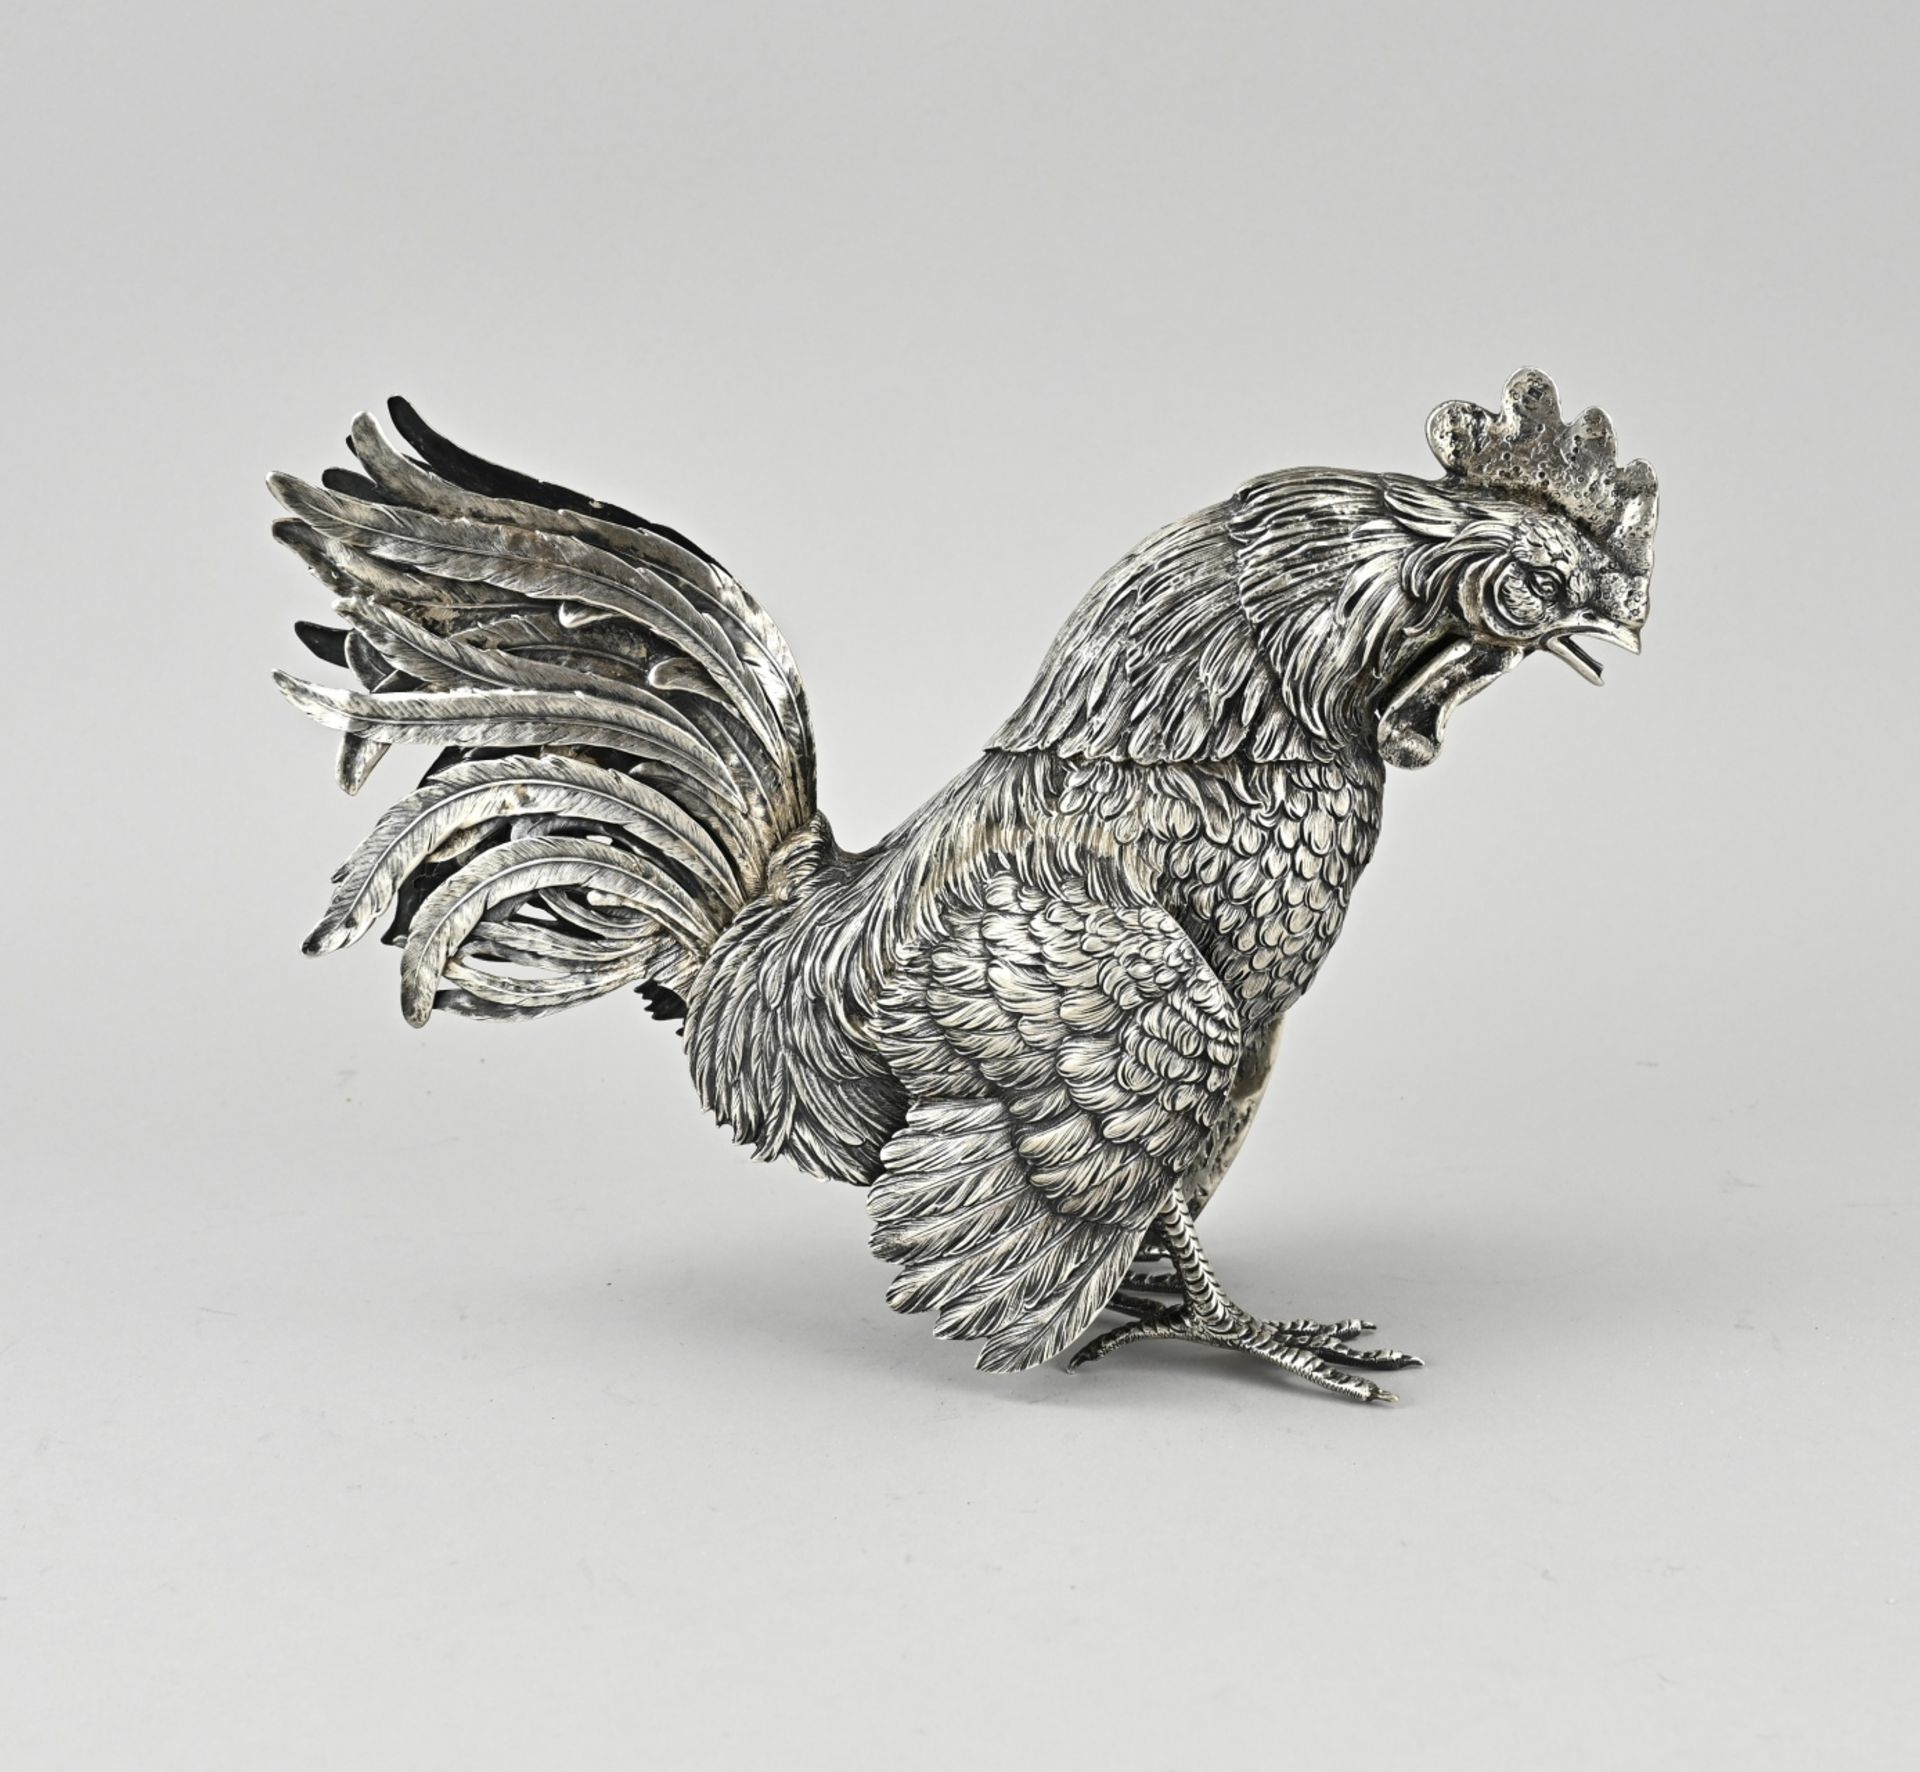 Big silver rooster